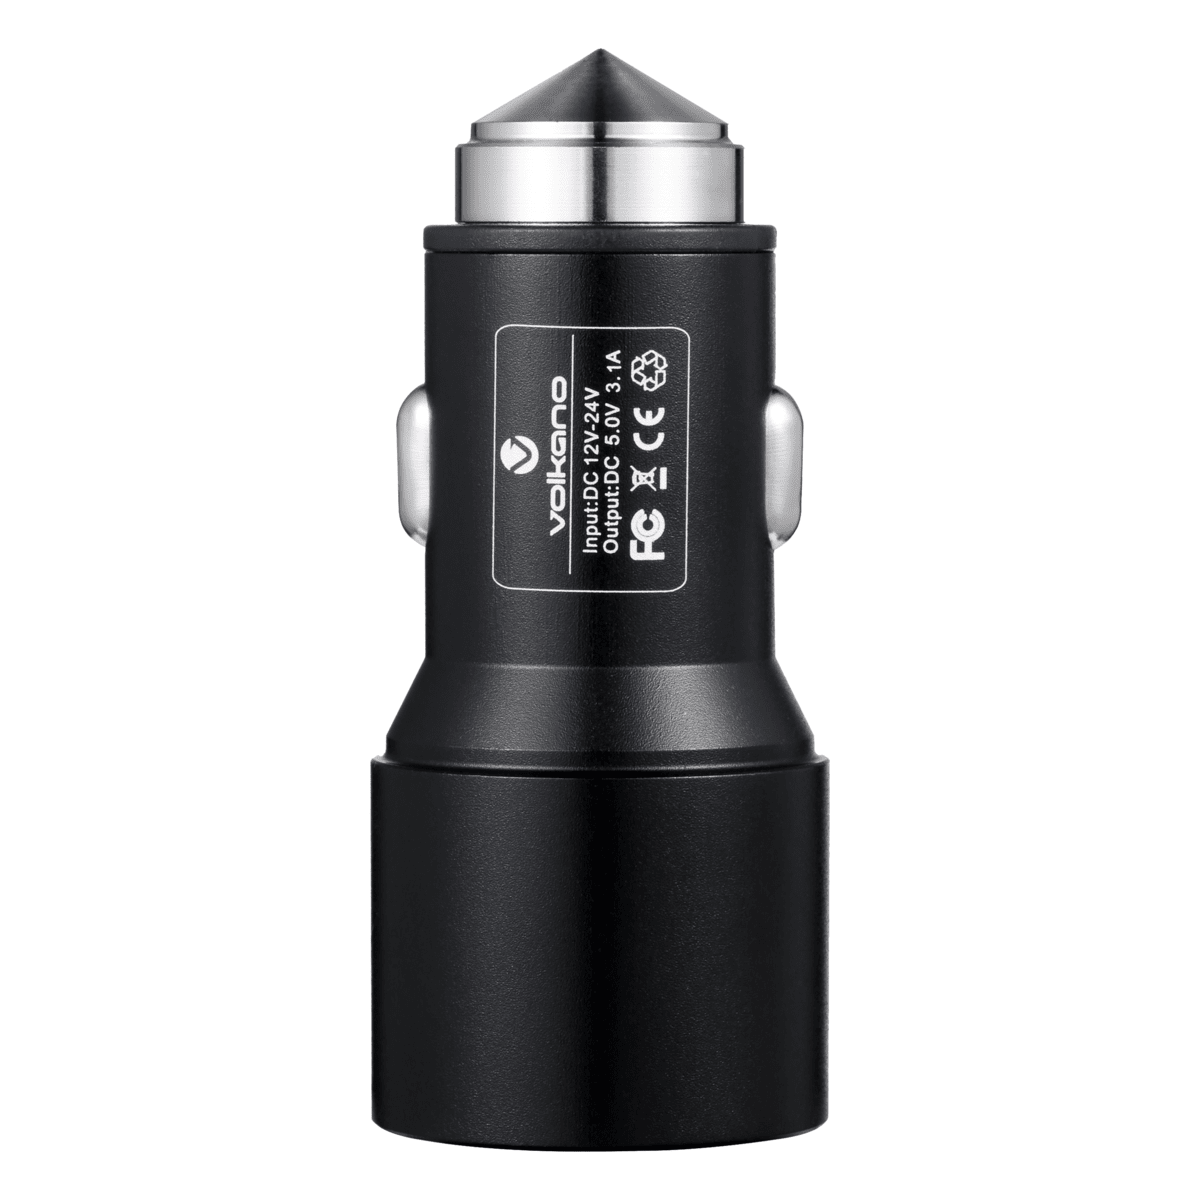 Volkano Swift X2 USB Car Charger with Cable